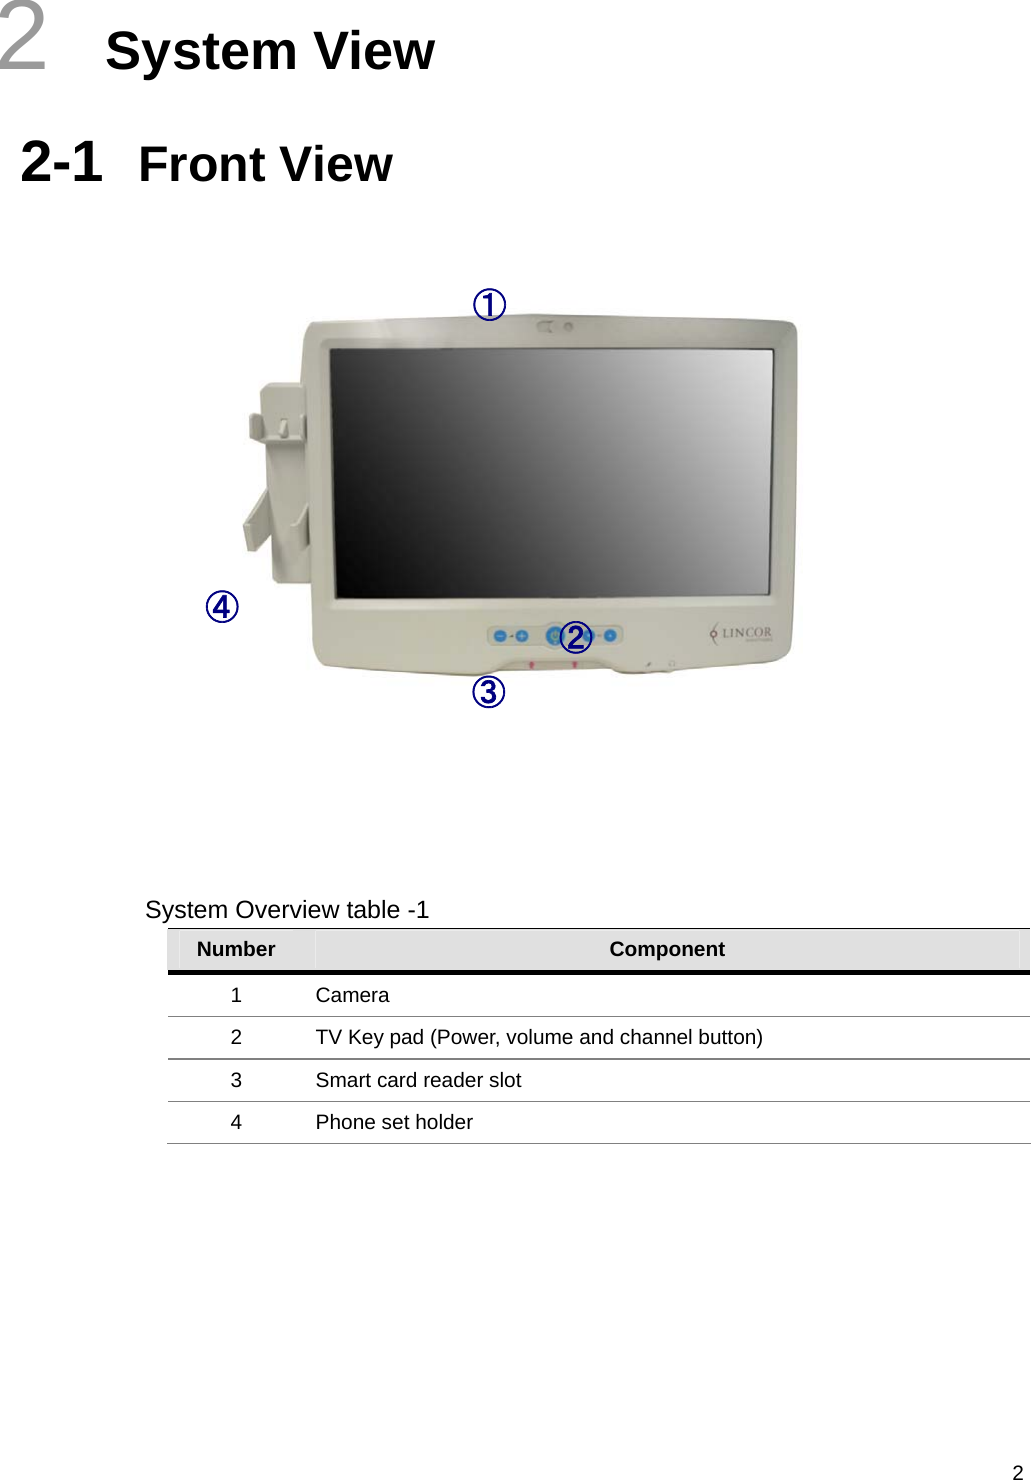  22  System View 2-1  Front View         System Overview table -1 Number  Component 1 Camera 2  TV Key pad (Power, volume and channel button) 3  Smart card reader slot 4  Phone set holder ① ② ③ ④ 